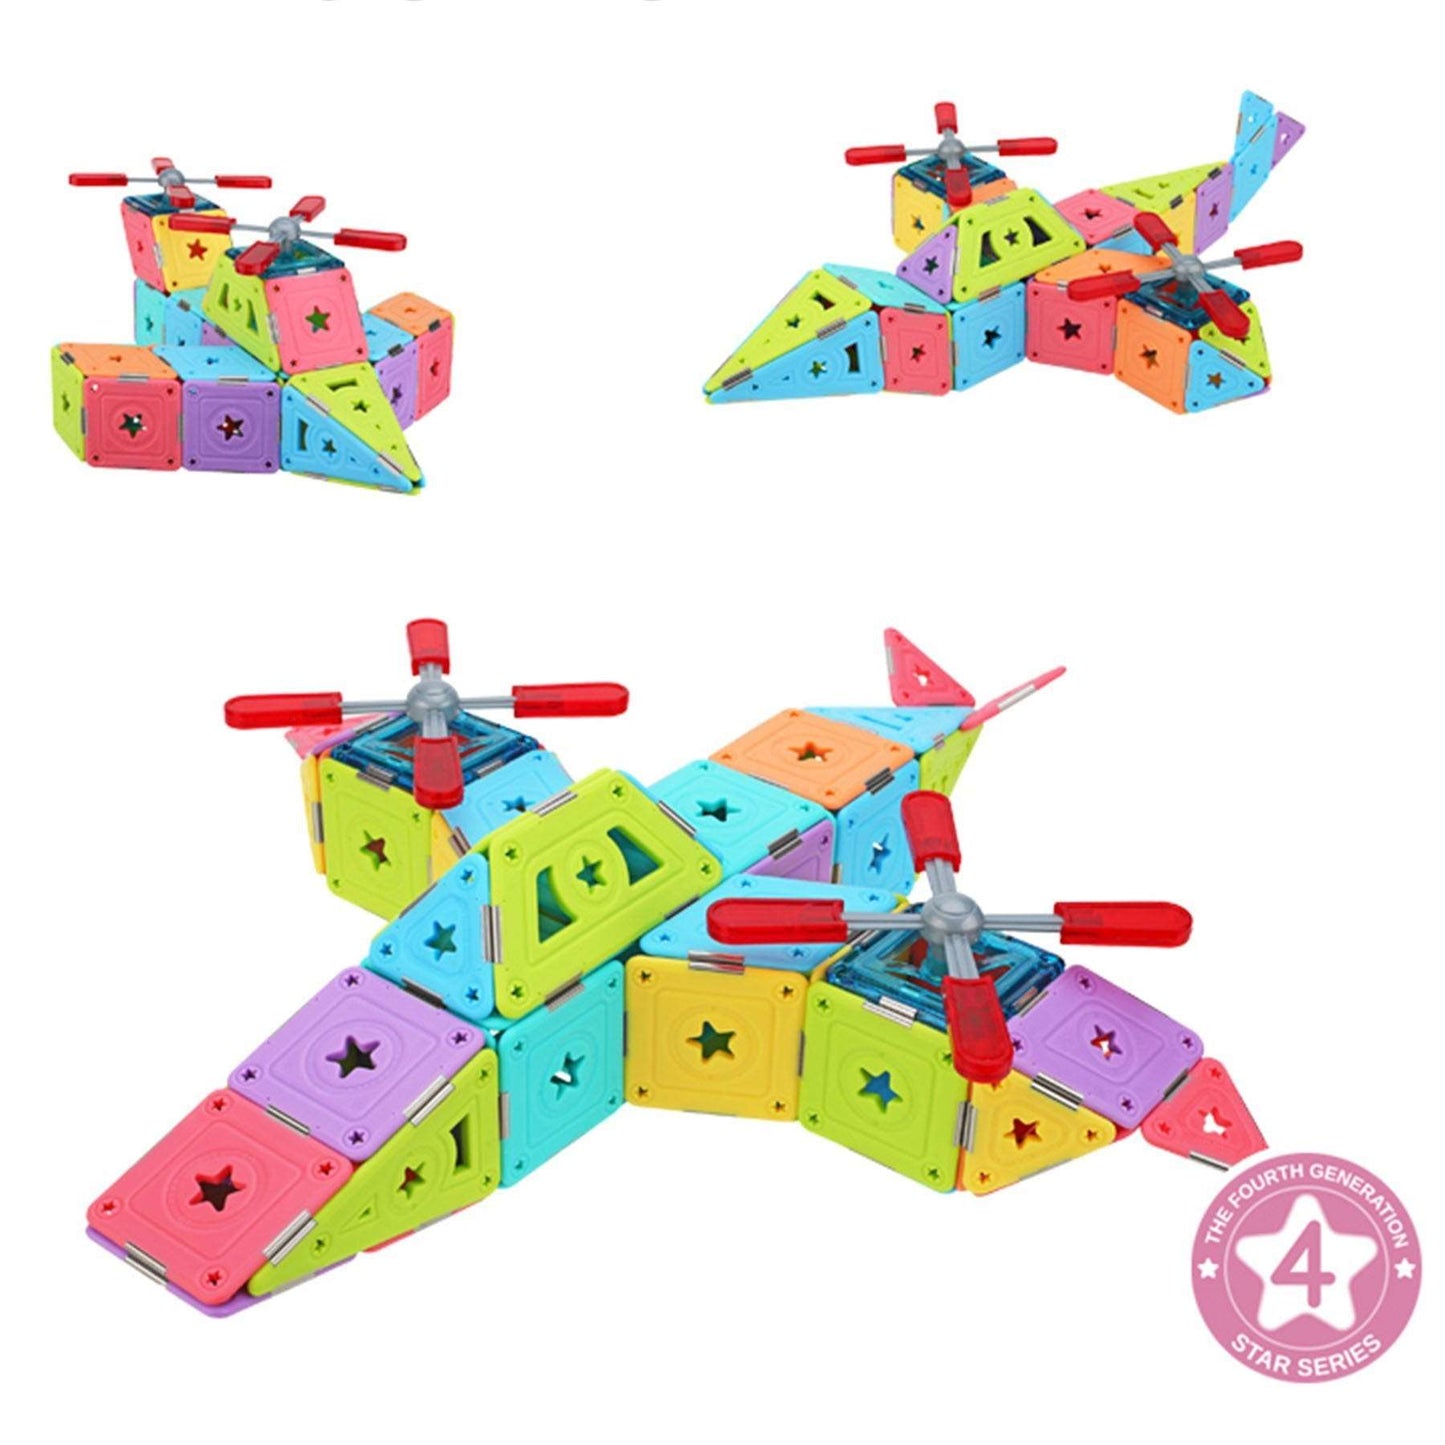 Magspace Magnetic Building Blocks The Perfect Pilot - Soft Glue Star 74pcs freeshipping - GeorgiePorgy